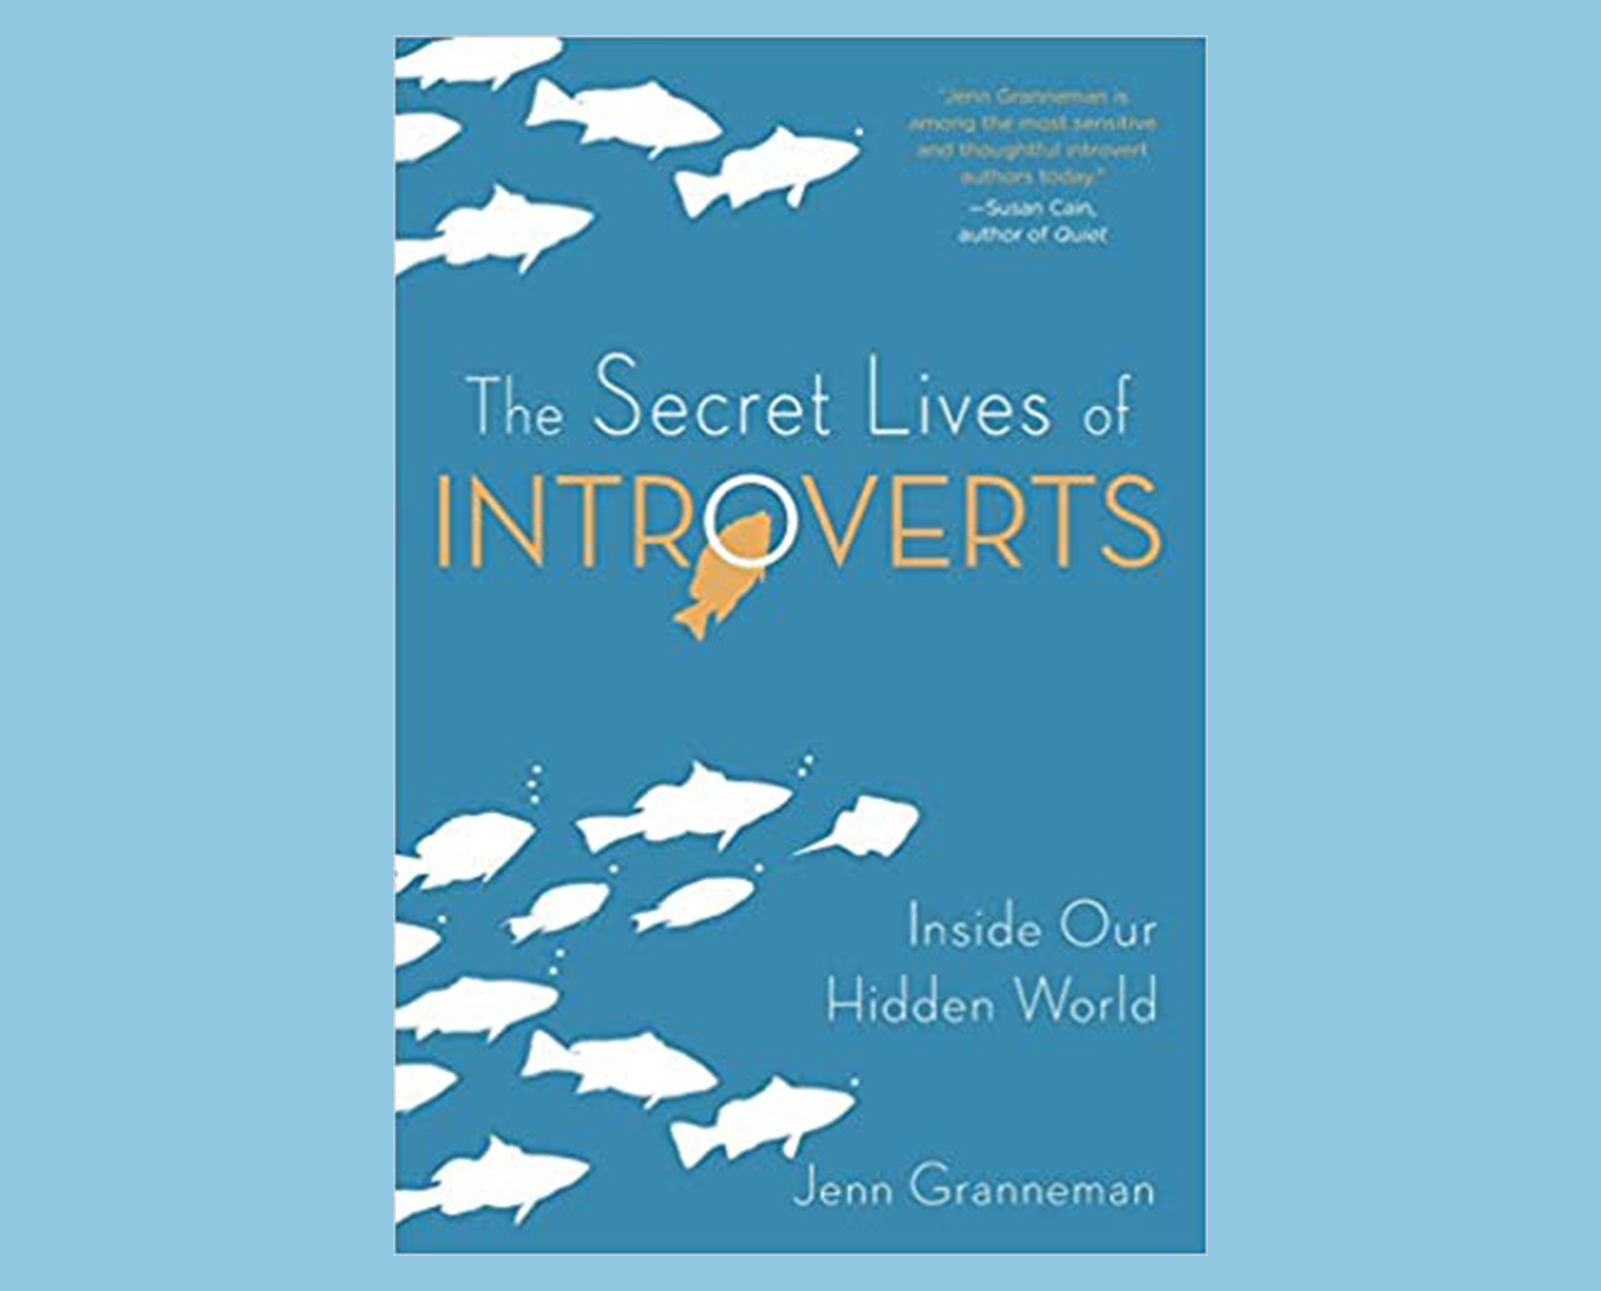 The Secret Lives of Introverts: Inside Our Hidden World